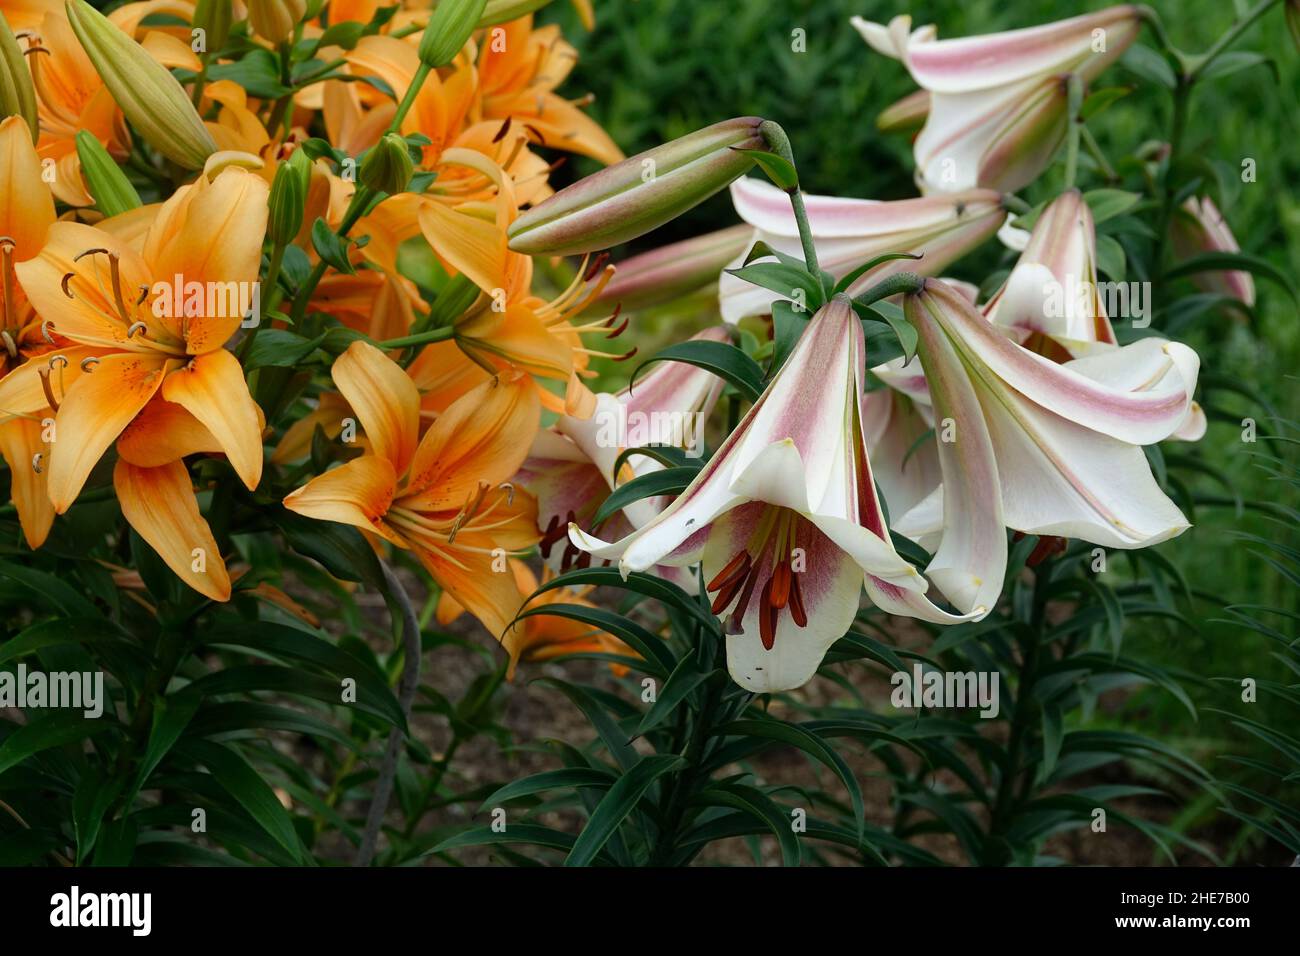 Lilium regale, also called the regal lily, royal lily, king's lily with trumpet-shaped flowers alongside a cluster of Orange Lilies in a Garden Stock Photo